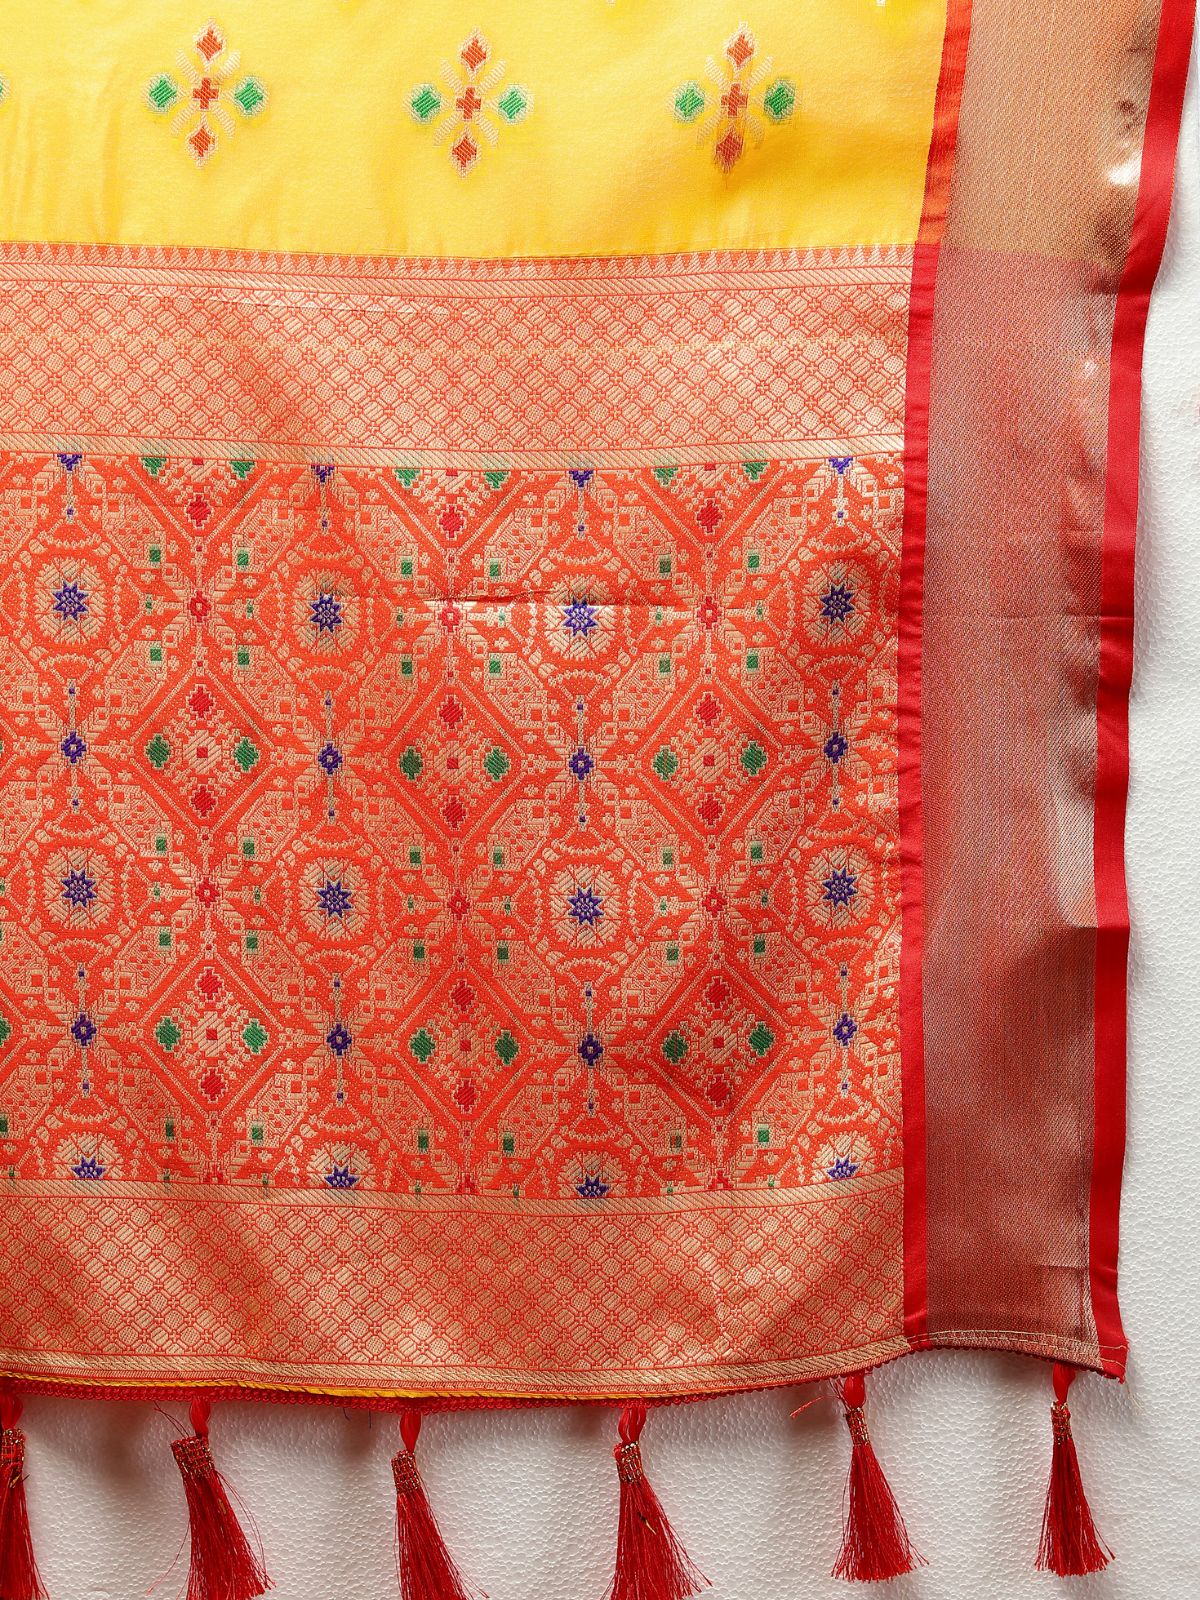 Odette Yellow Organza Woven Saree with Unstitched Blouse for Women